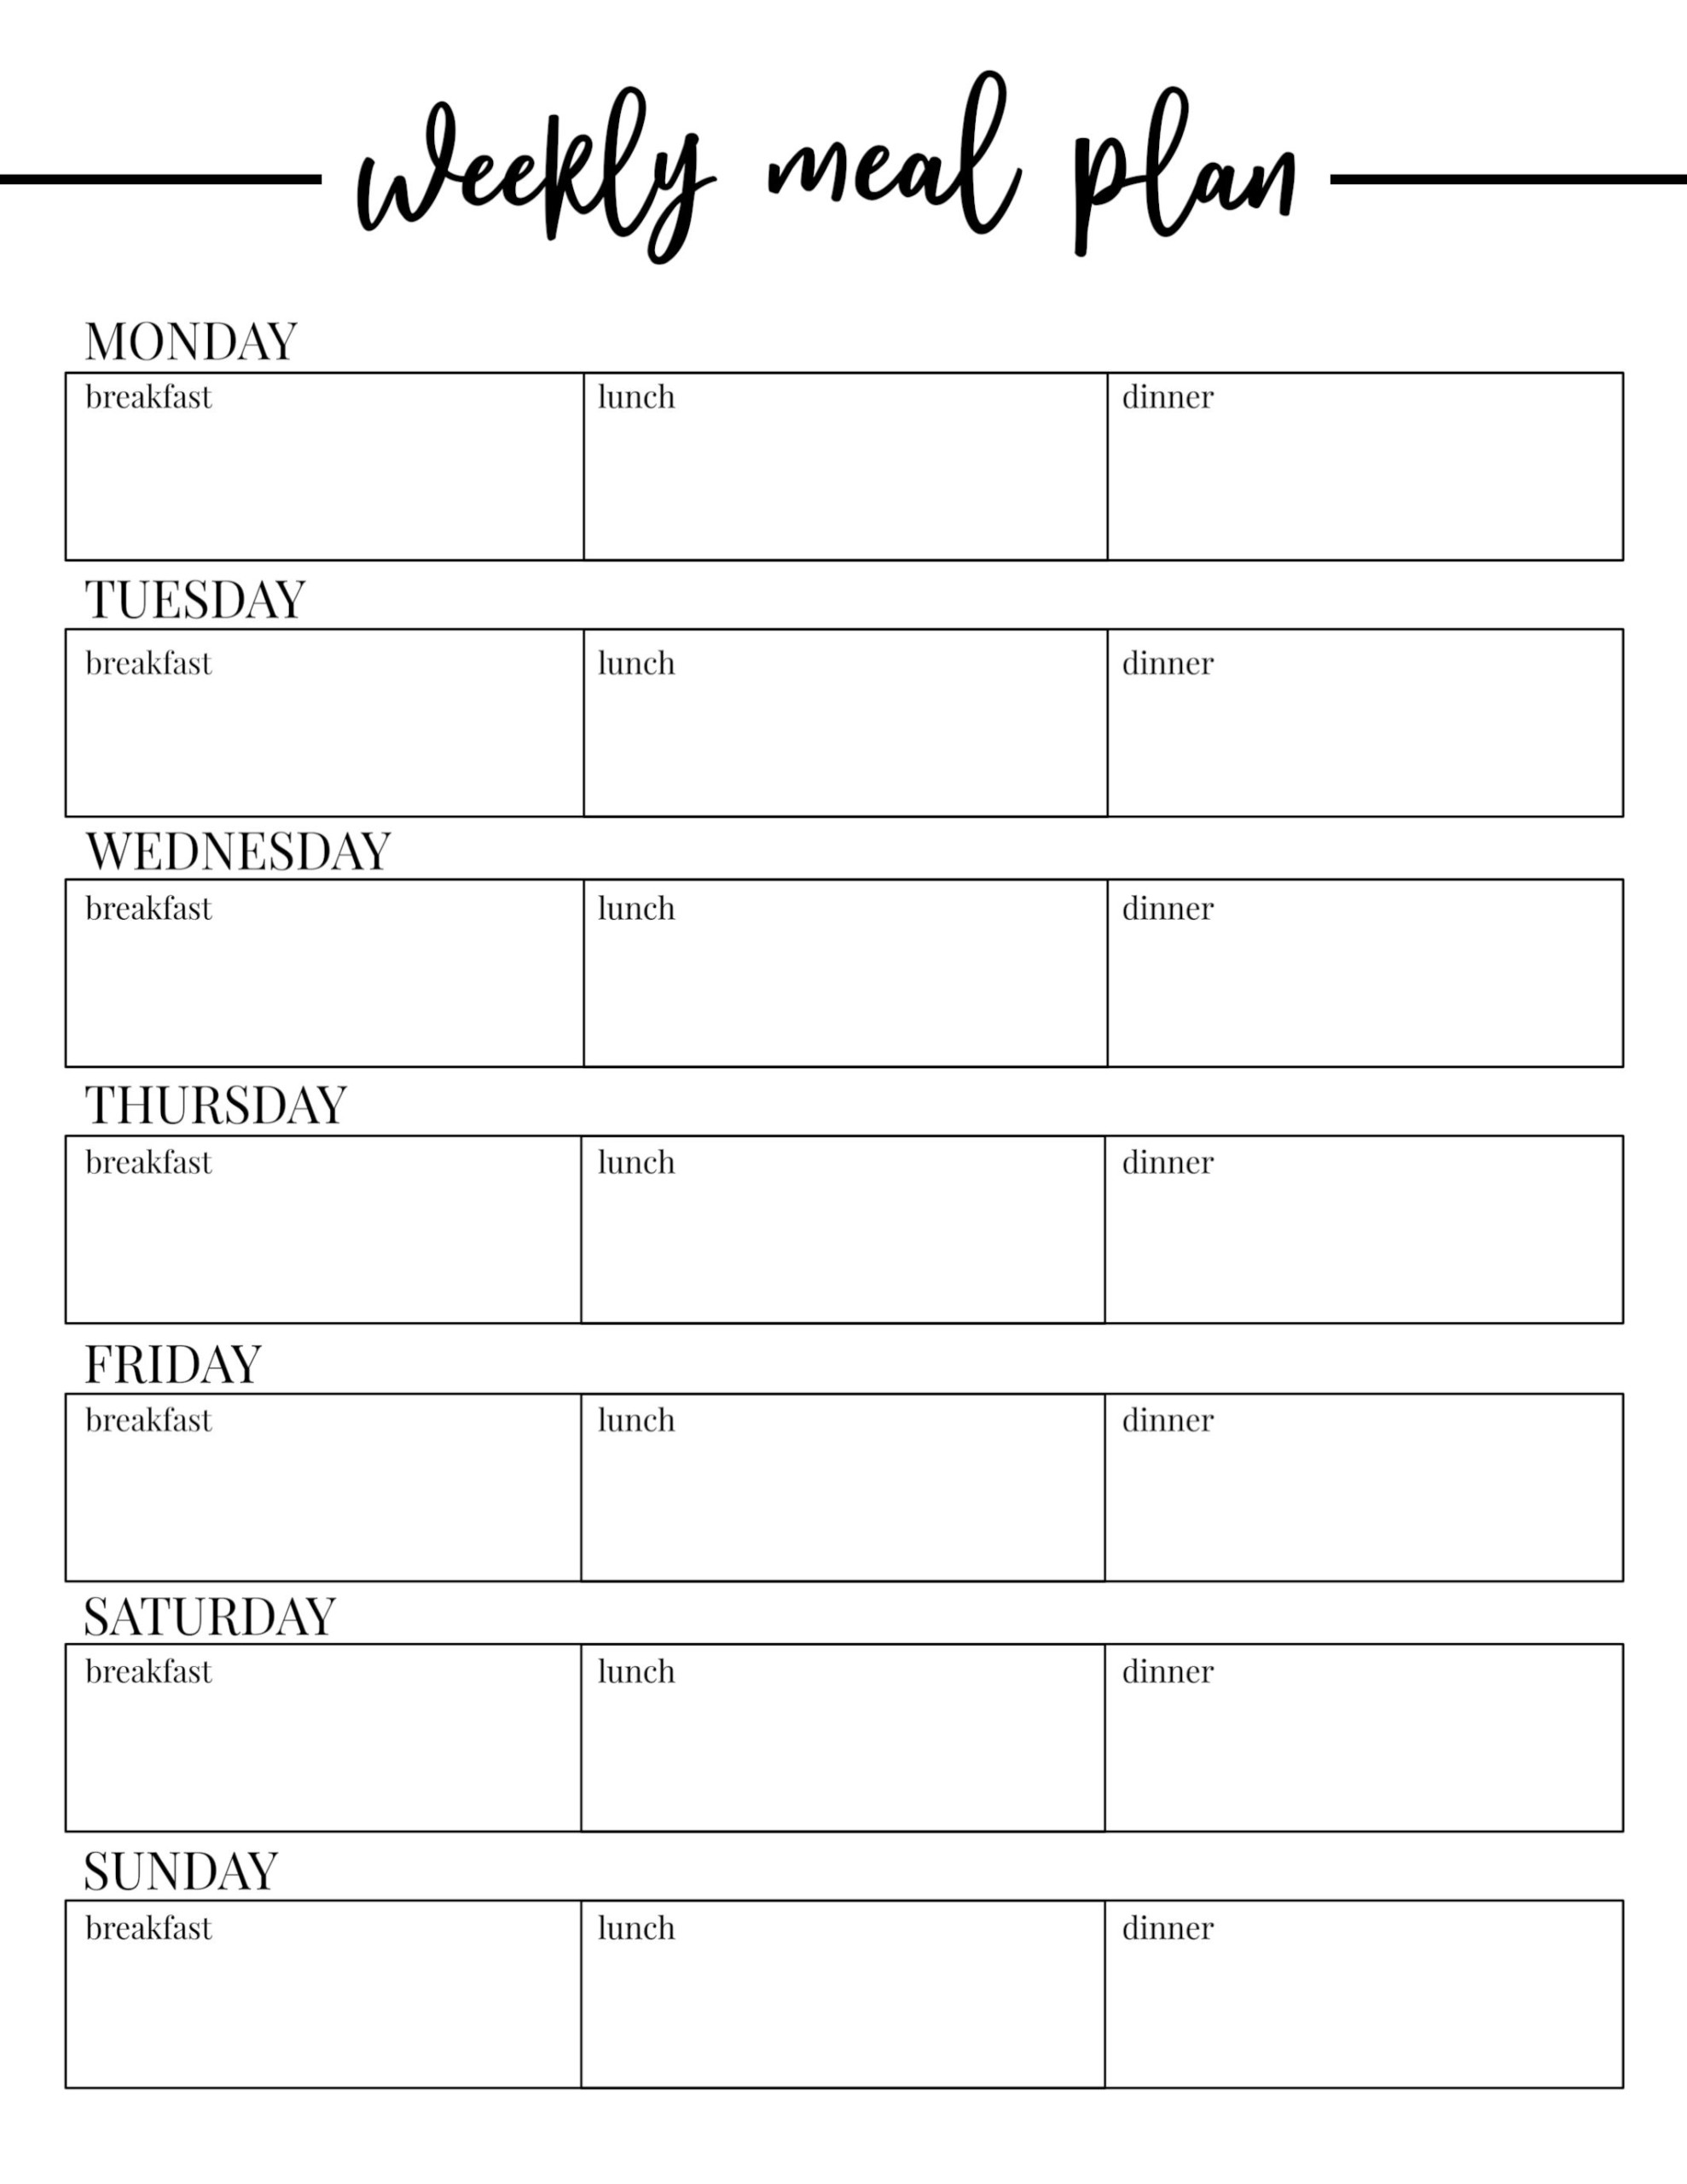 003 Daily Meal Plan Template Weekly Phenomenal Ideas 